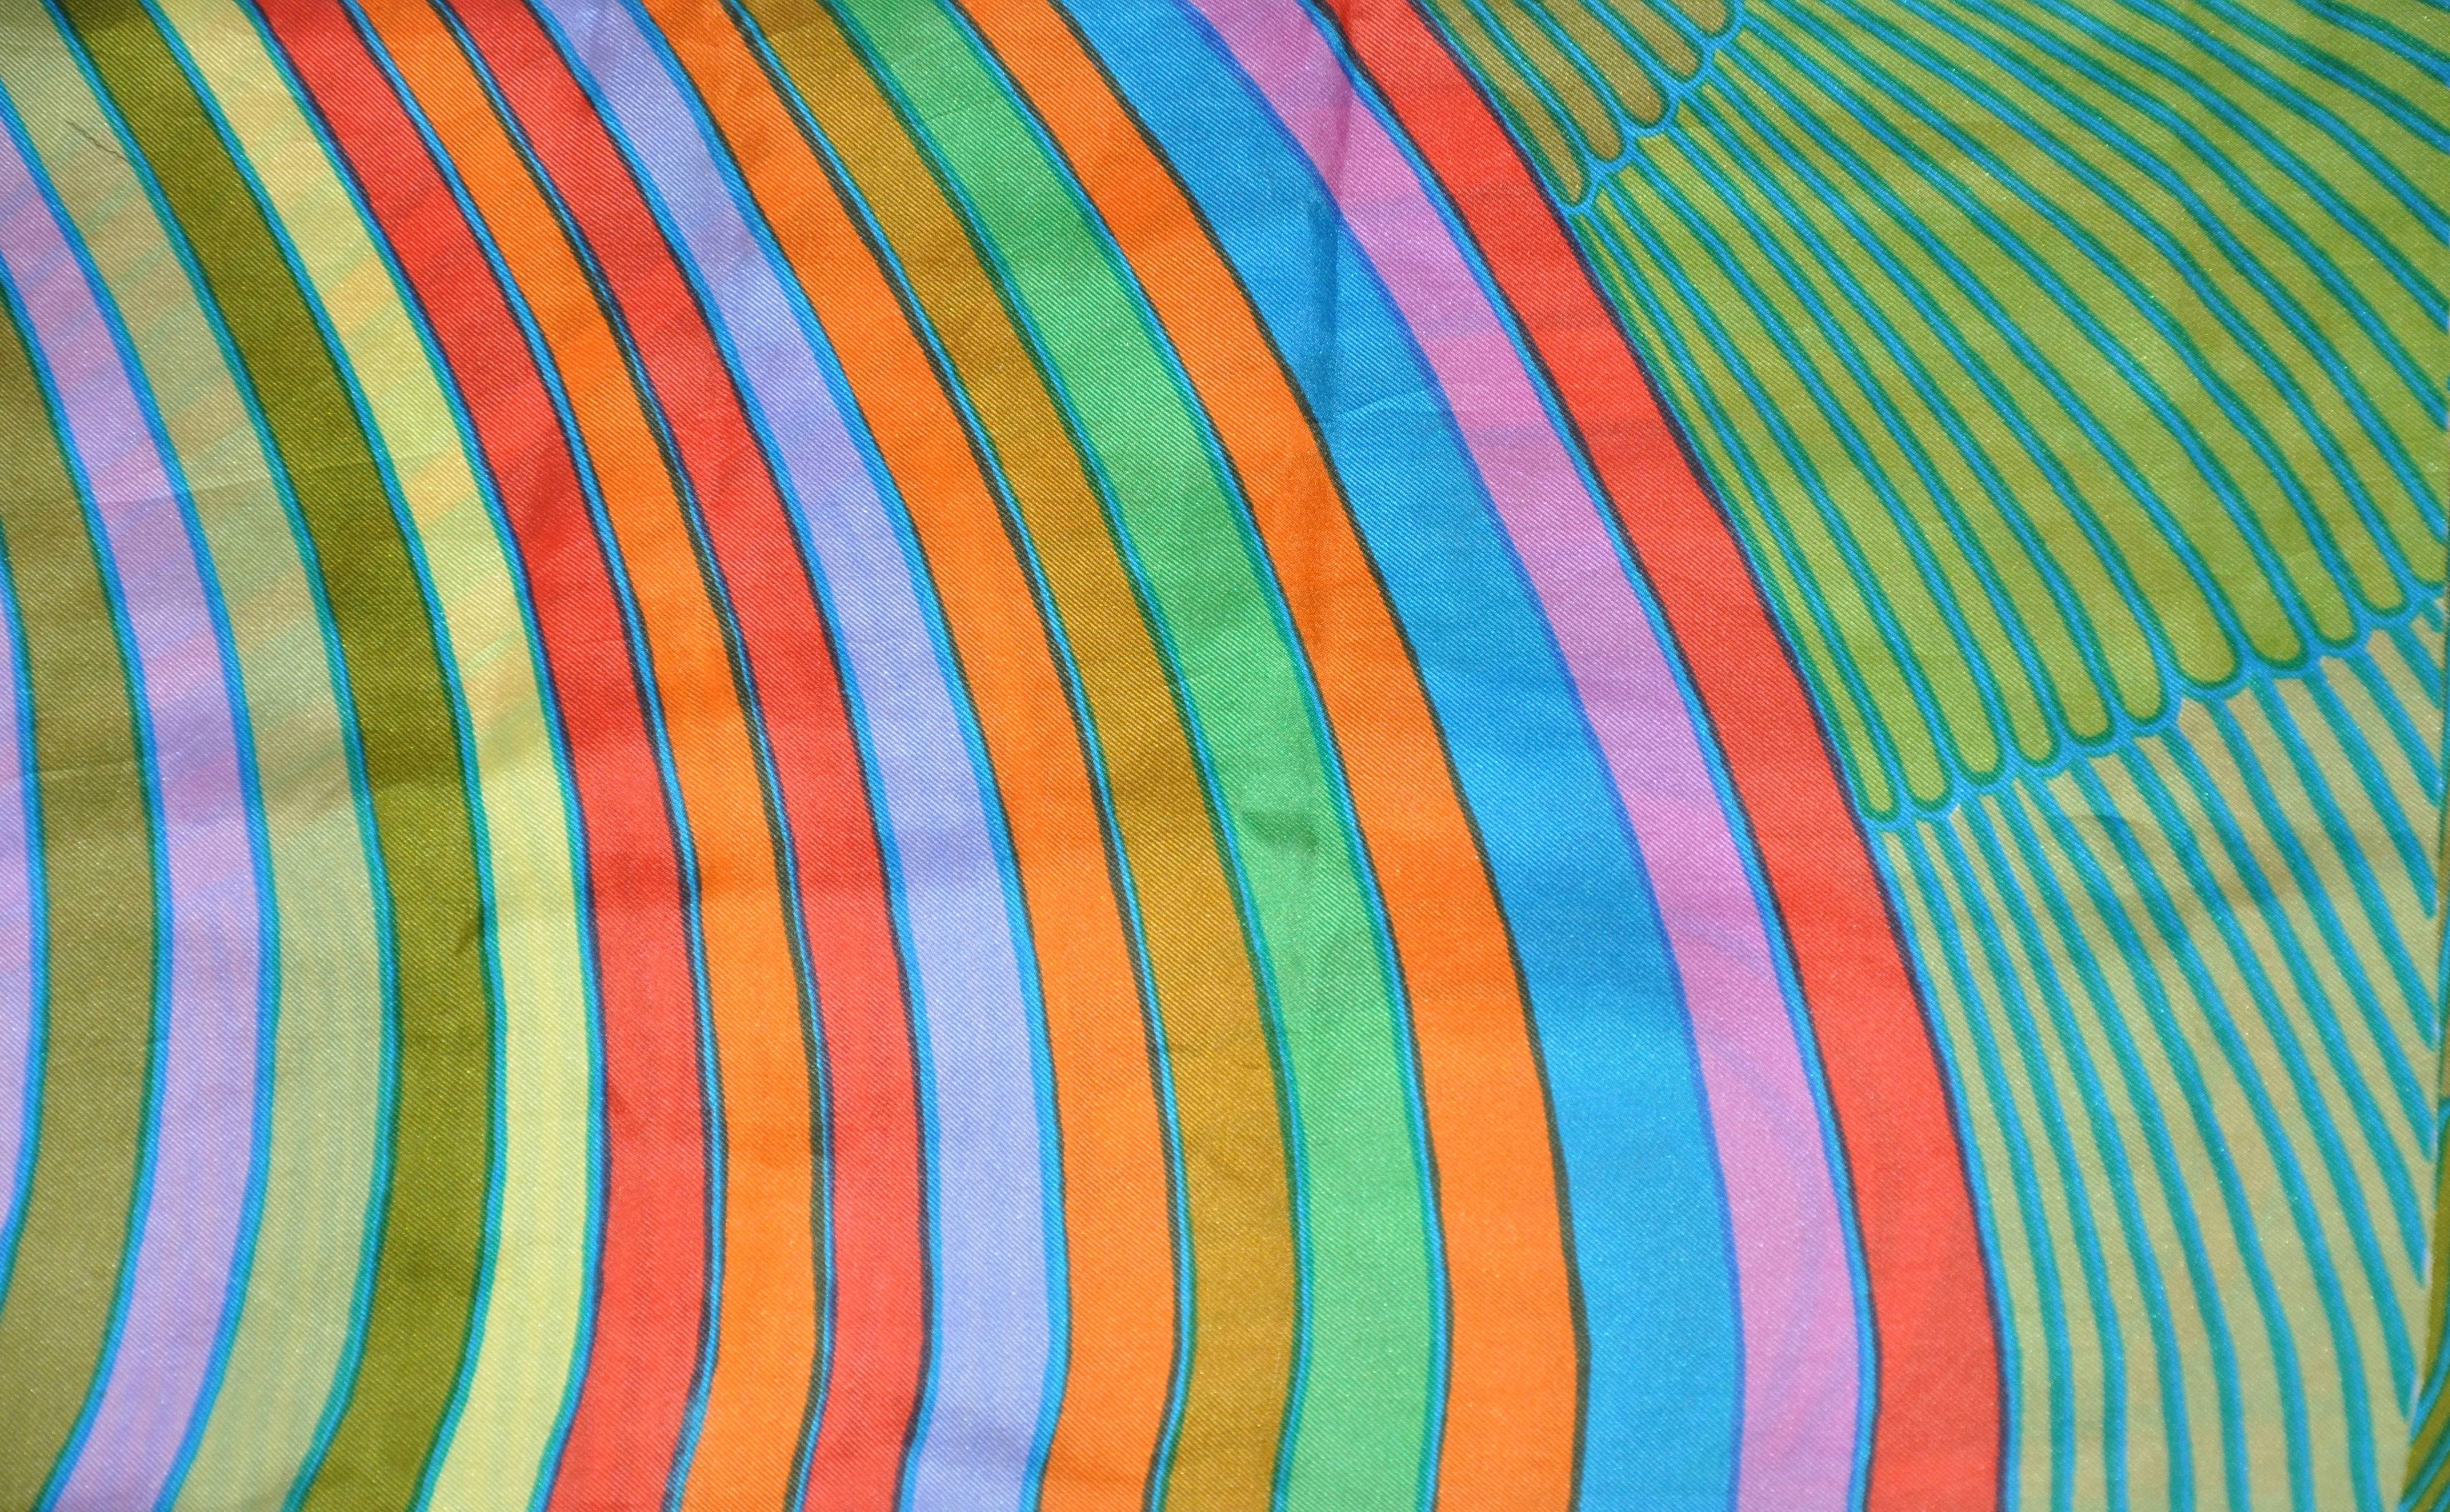 This wonderful and colorful double-layered "Colors of the Rainbow" is accented with fringed edges, and measures 9 1/2" x 42". Made in the USA.